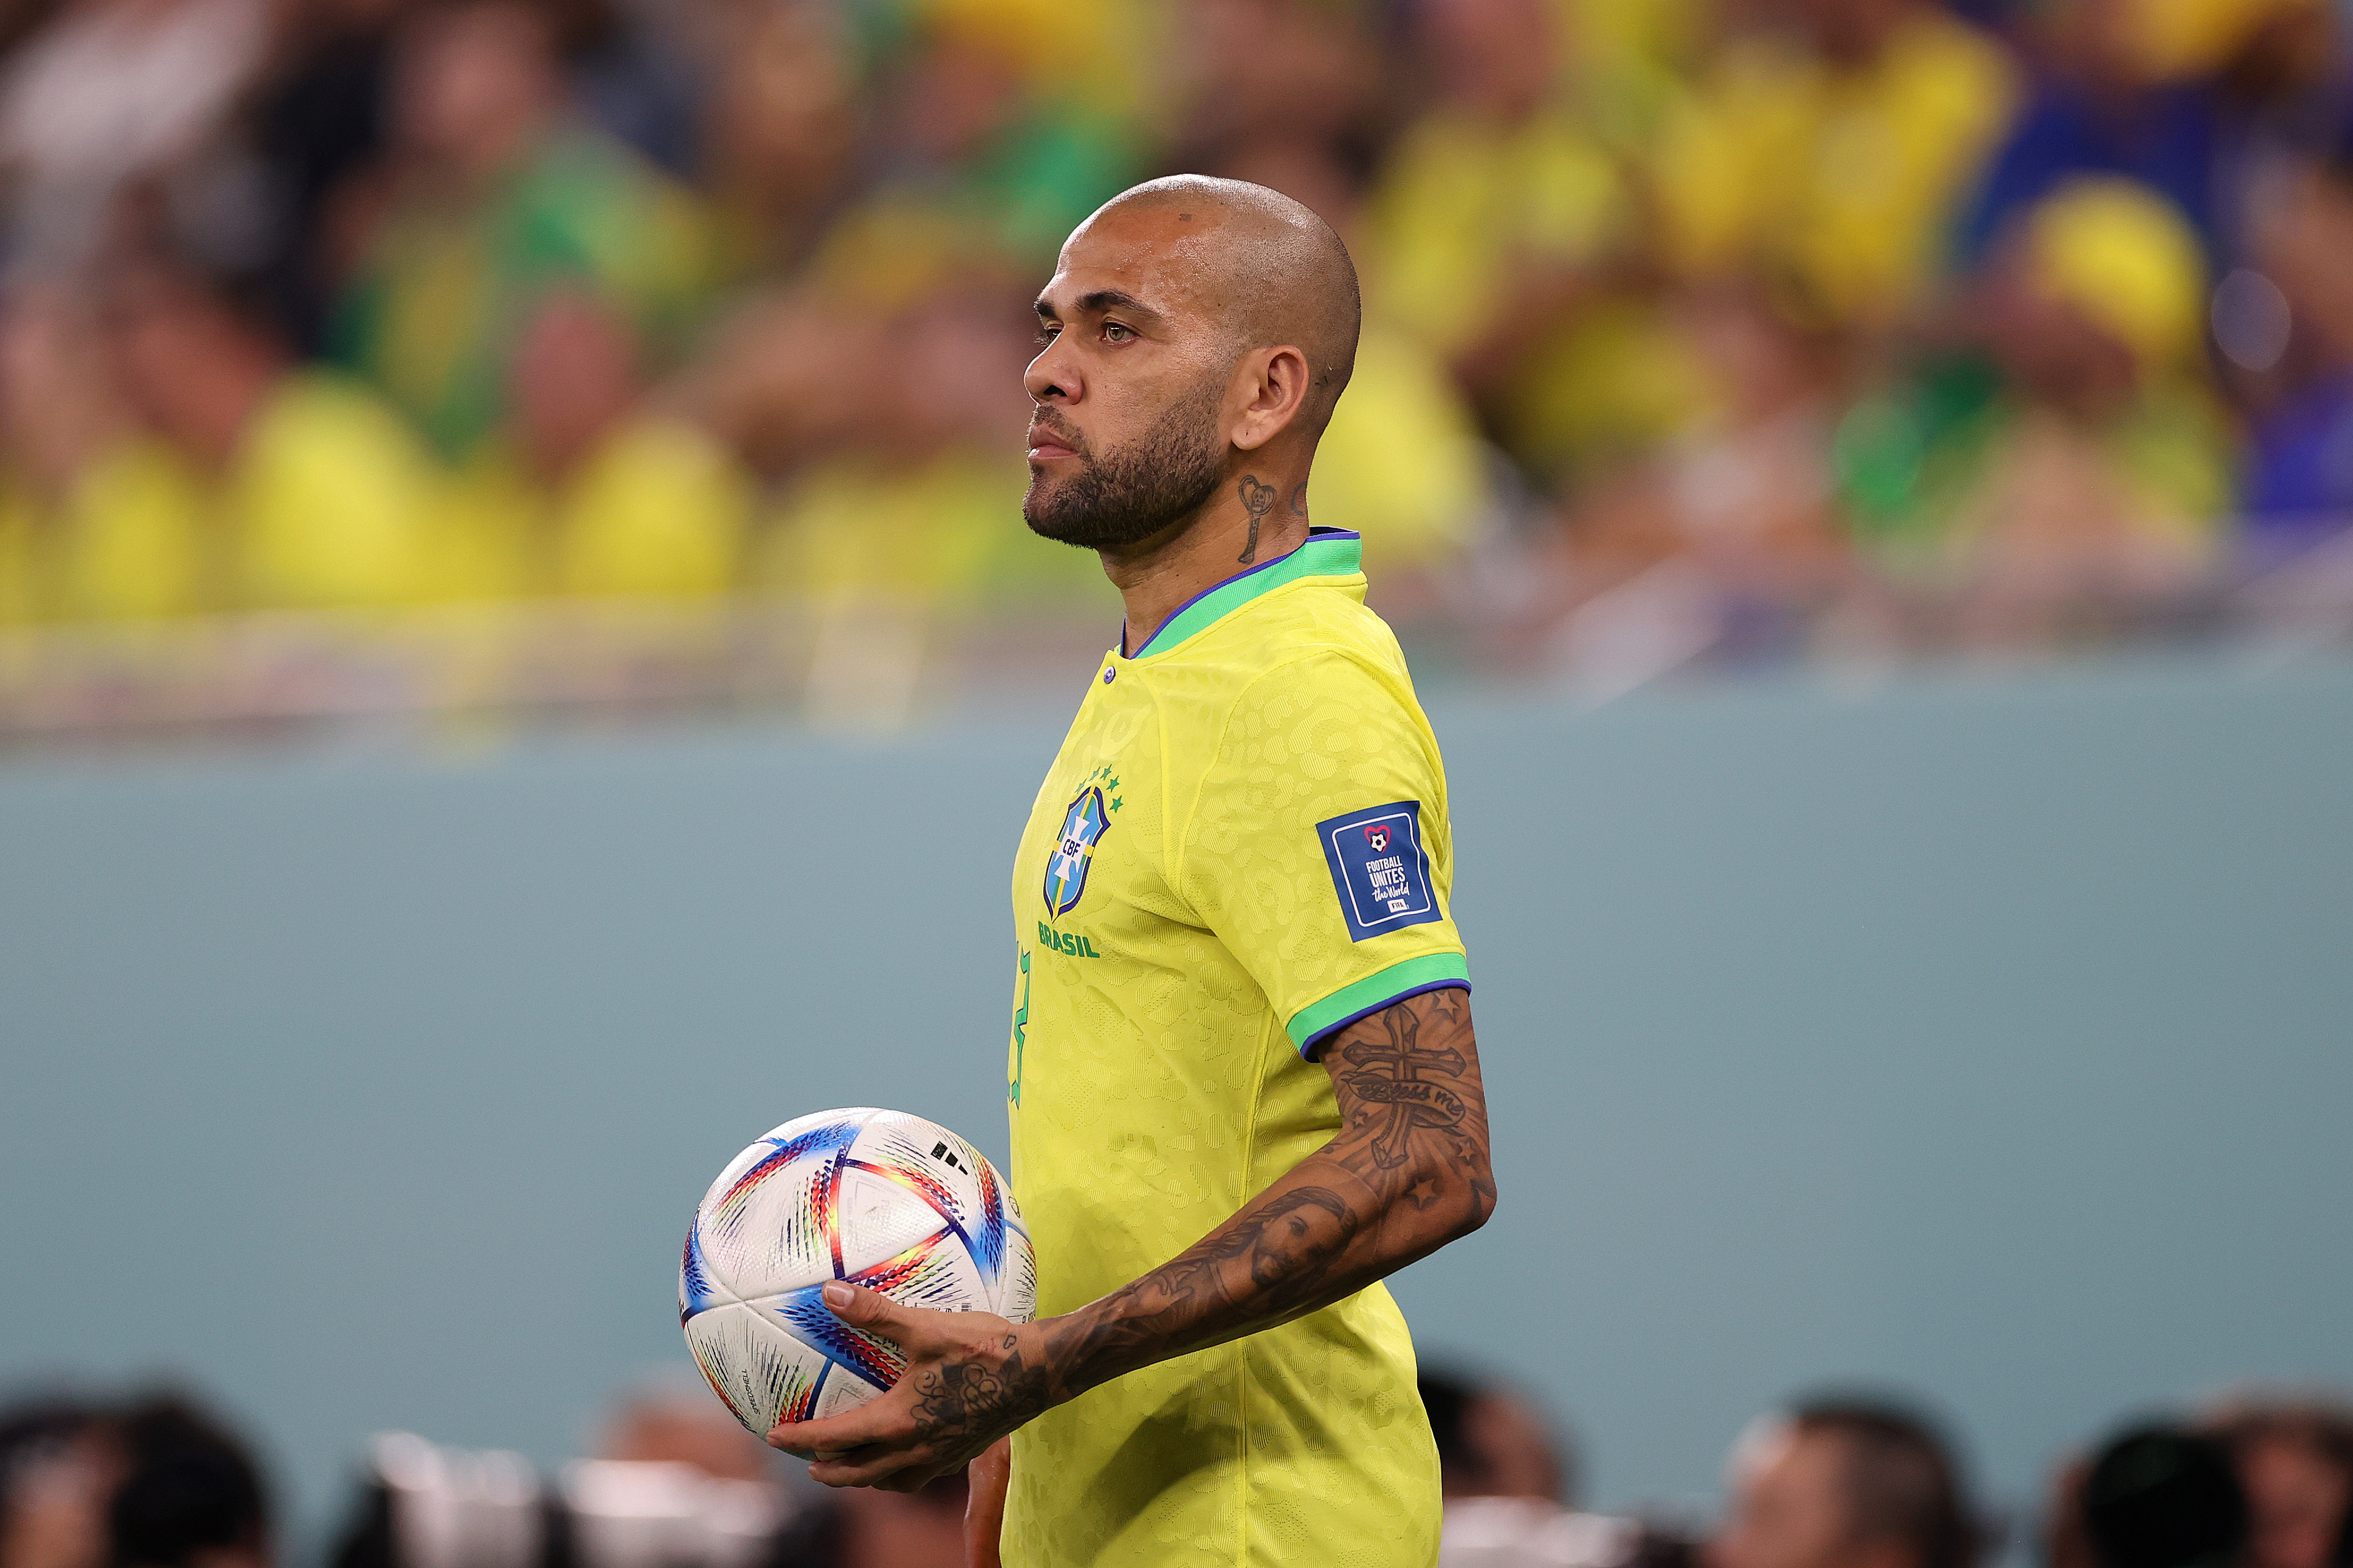 Brazilian soccer player Dani Alves arrested in Spain after being accused of  sexual abuse - The Boston Globe